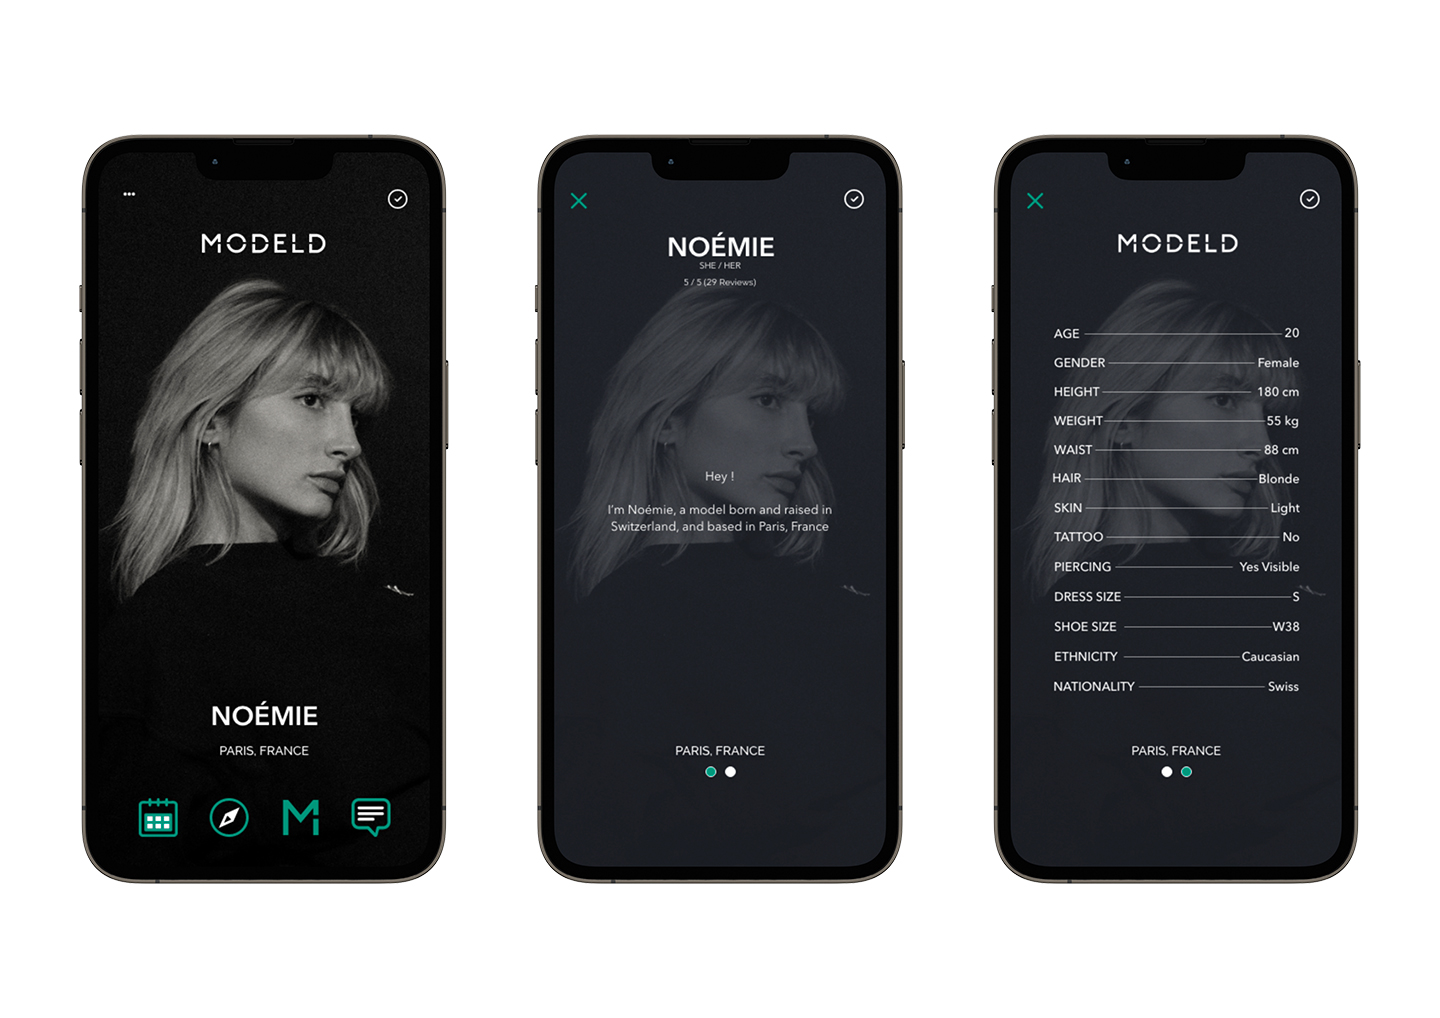 Imagined by IM alumnus Karim El Sabeh, Modeld is an app connecting brands and models by adding safety, inclusivity and transparency to the modelling industry